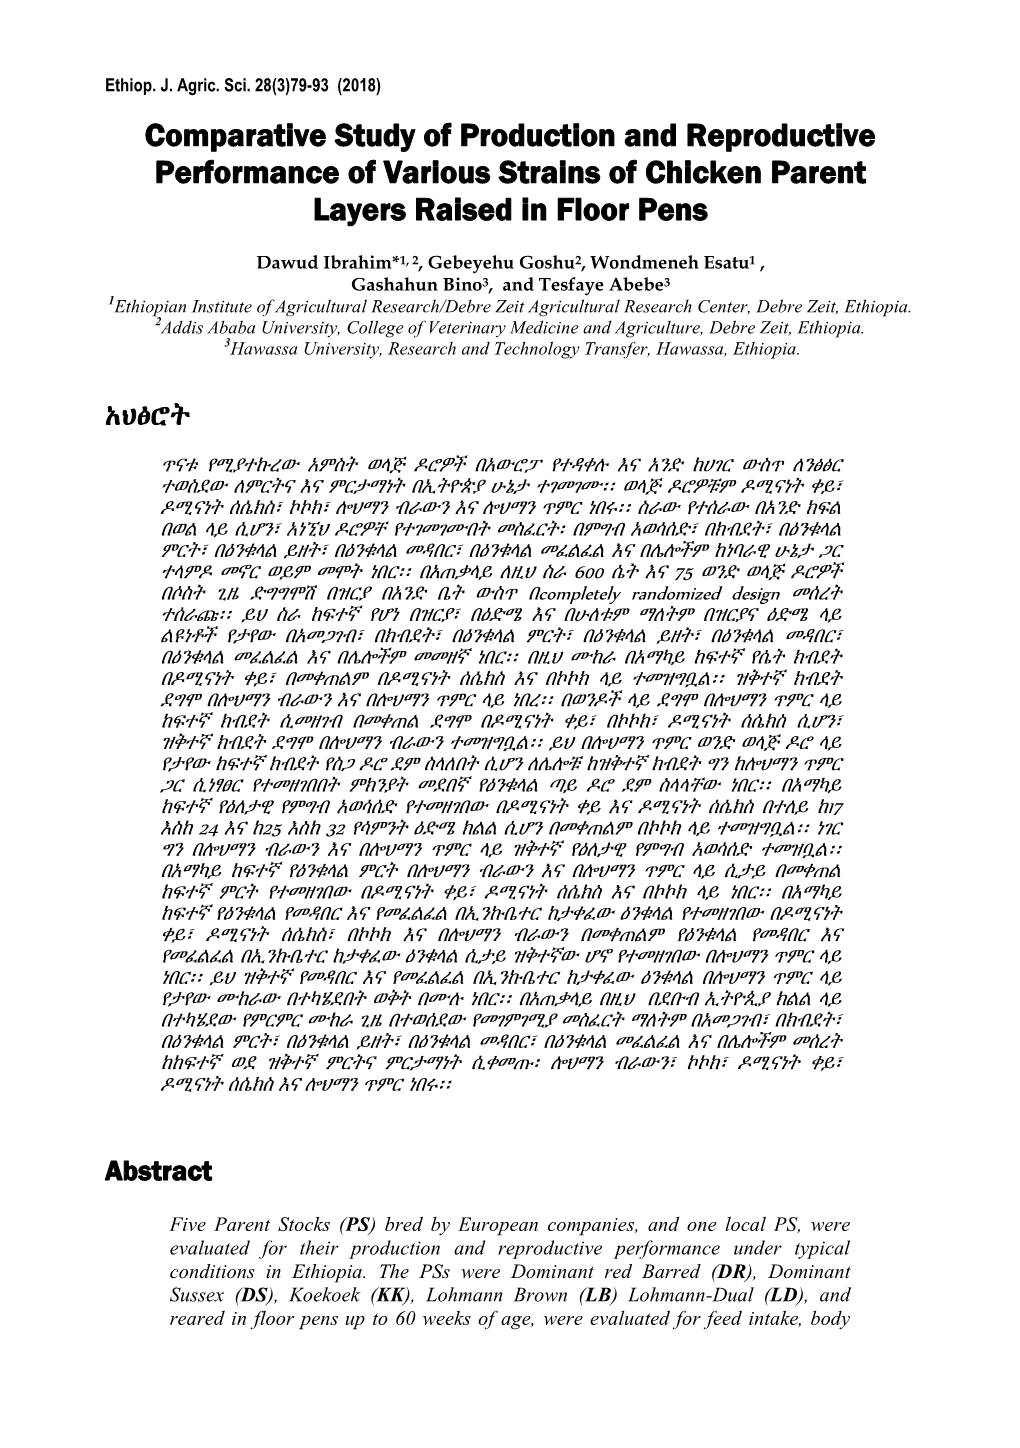 Comparative Study of Production and Reproductive Performance of Various Strains of Chicken Parent Layers Raised in Floor Pens